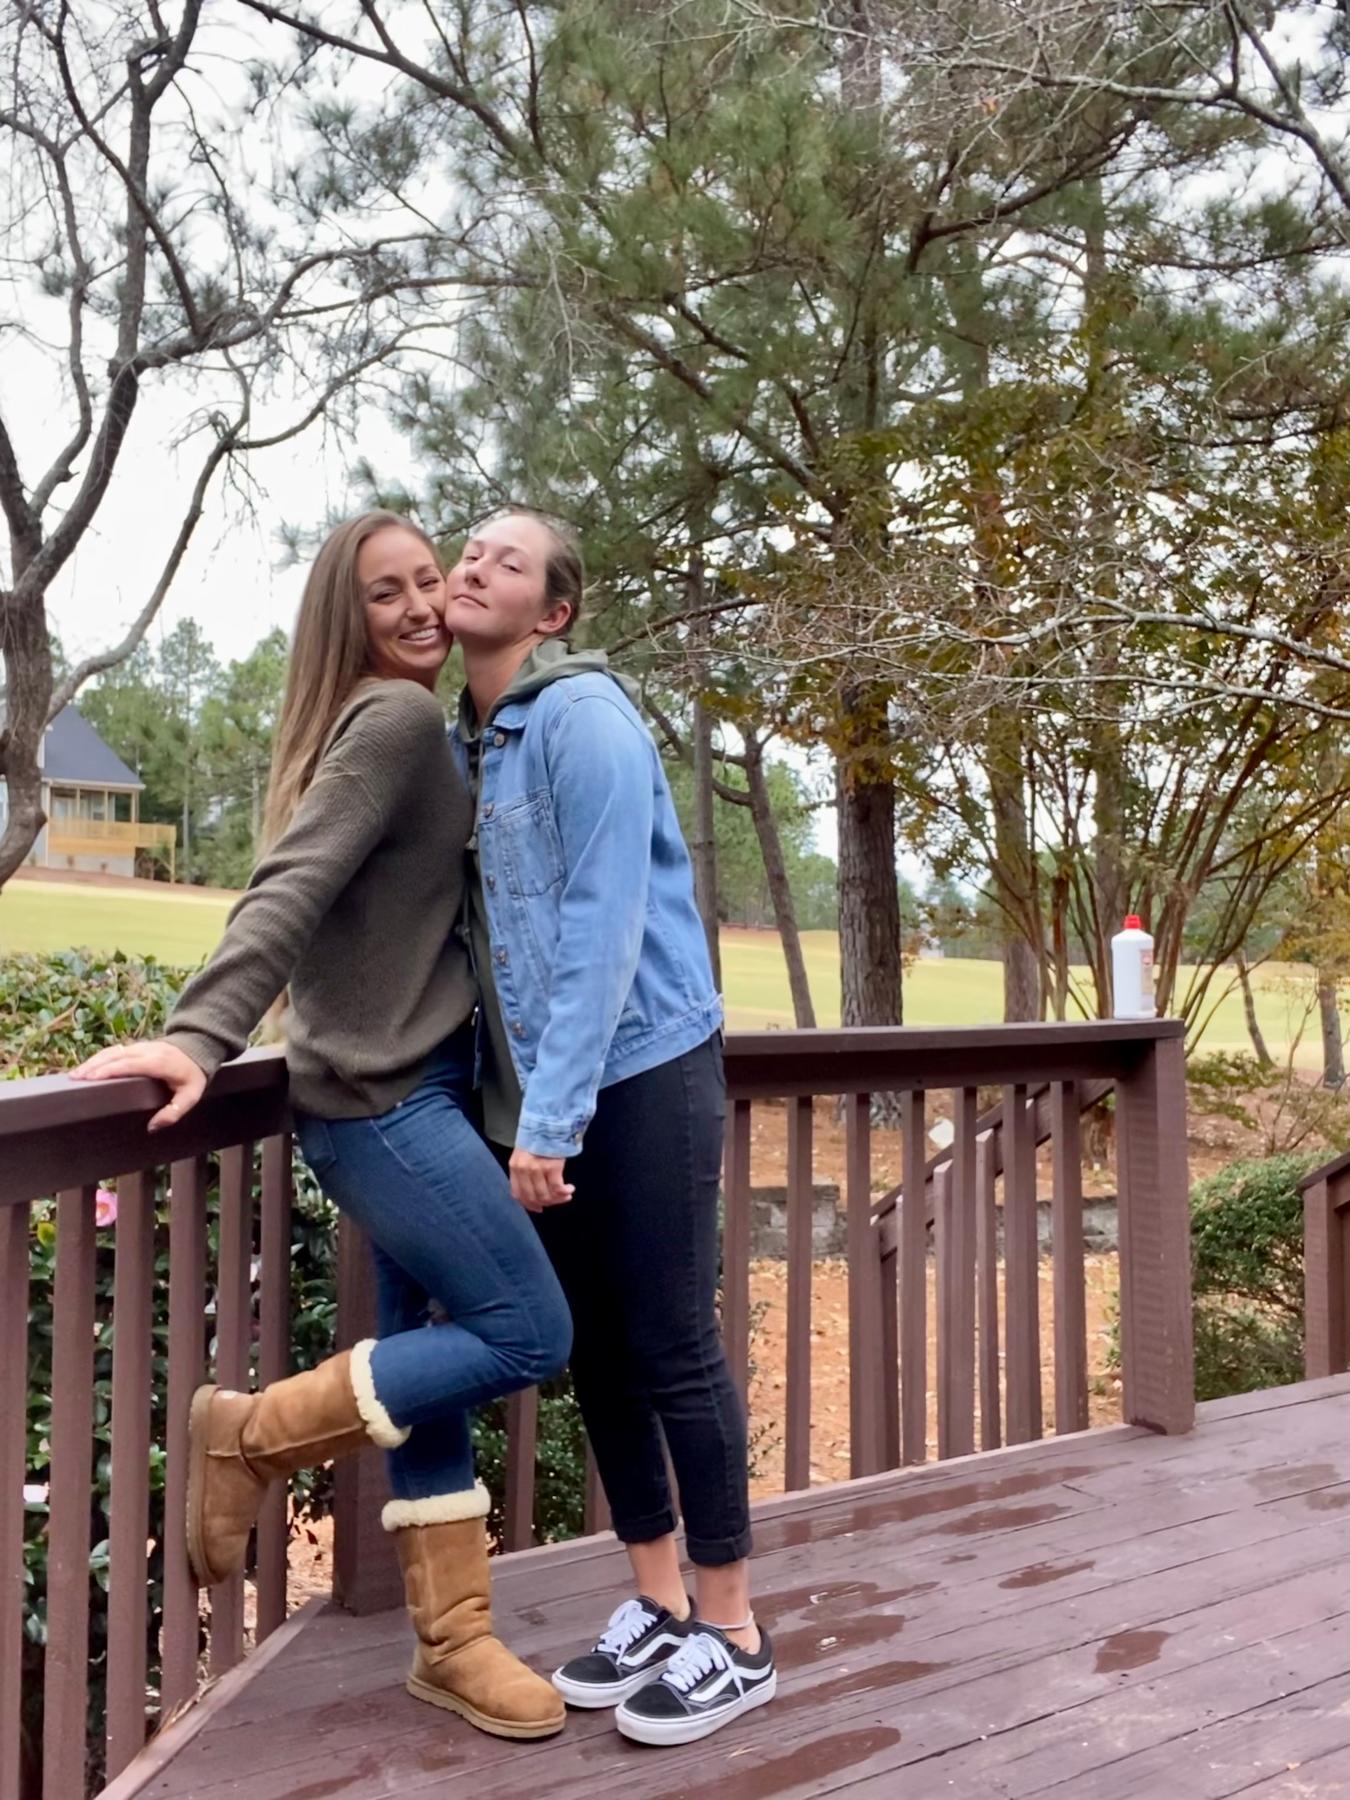 Our favorite place to travel to together! Pinehurst, NC